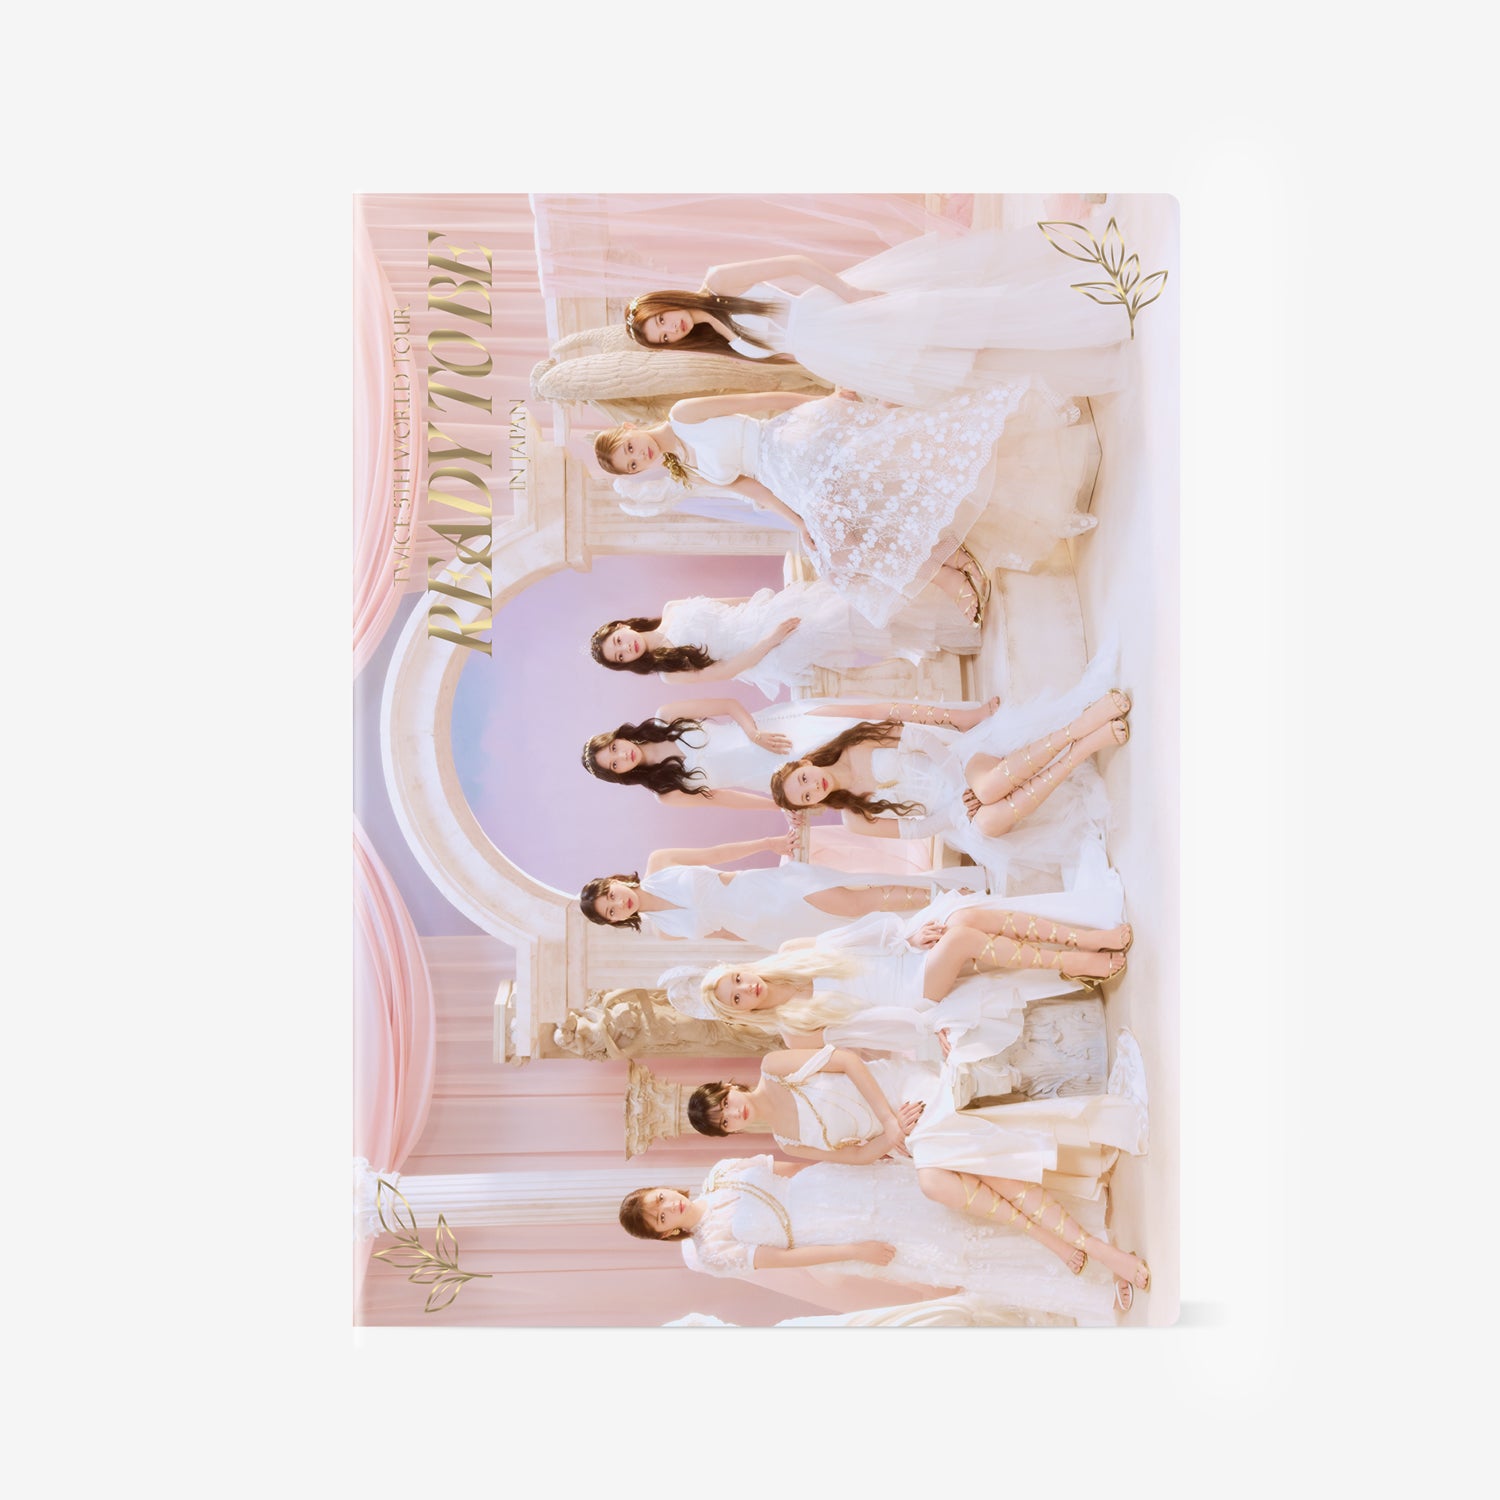 TRADING CARD CASE / TWICE『READY TO BE』